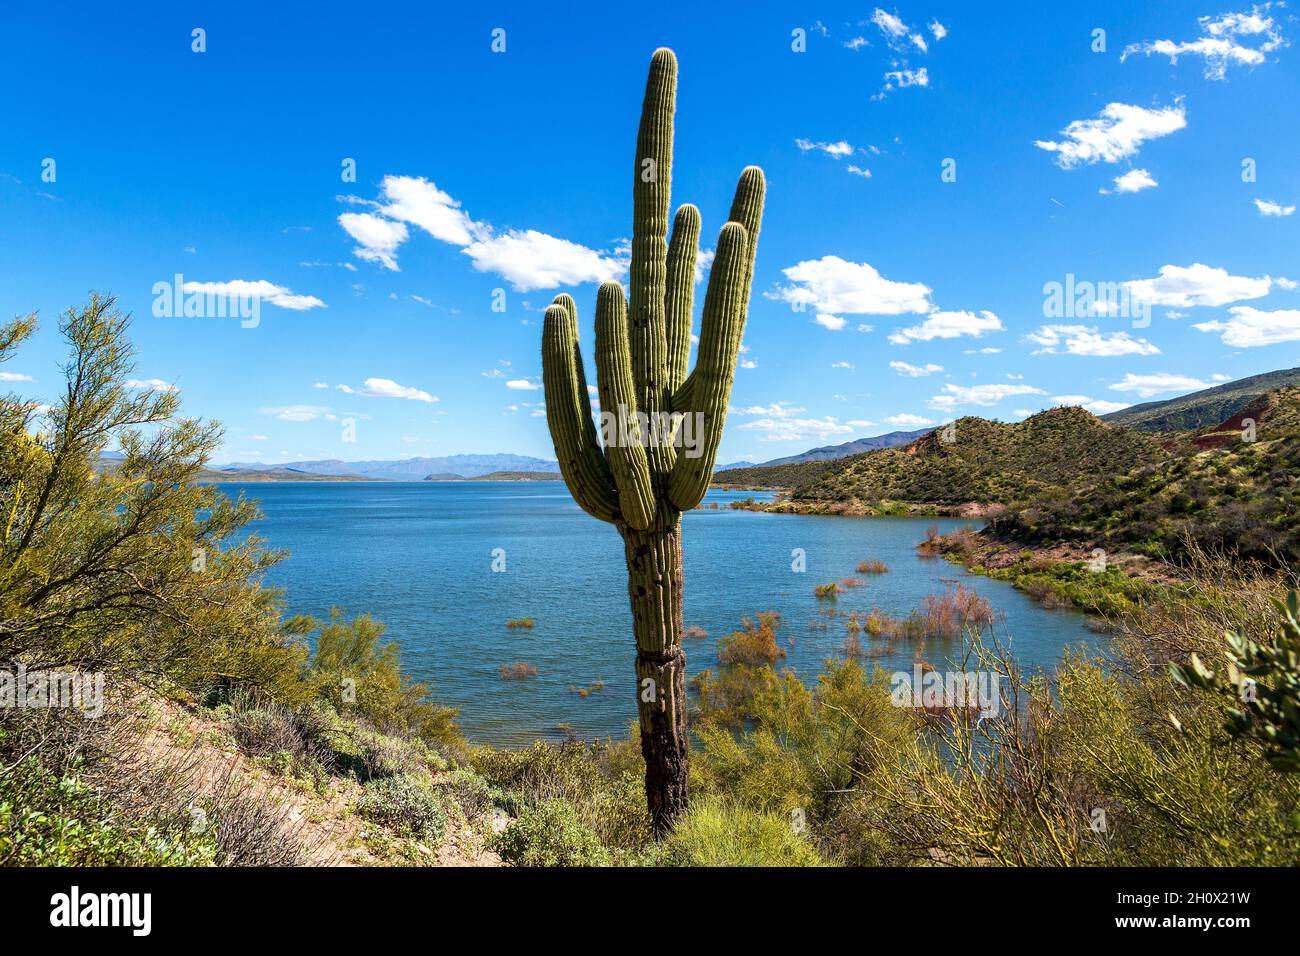 Saguaro Cactus and Water in Arizona Desert Landscape. Old saguaro cactus with multiple arms by Roosevelt Lake reservoir in Sonoran Desert of Arizona. Stock Photo